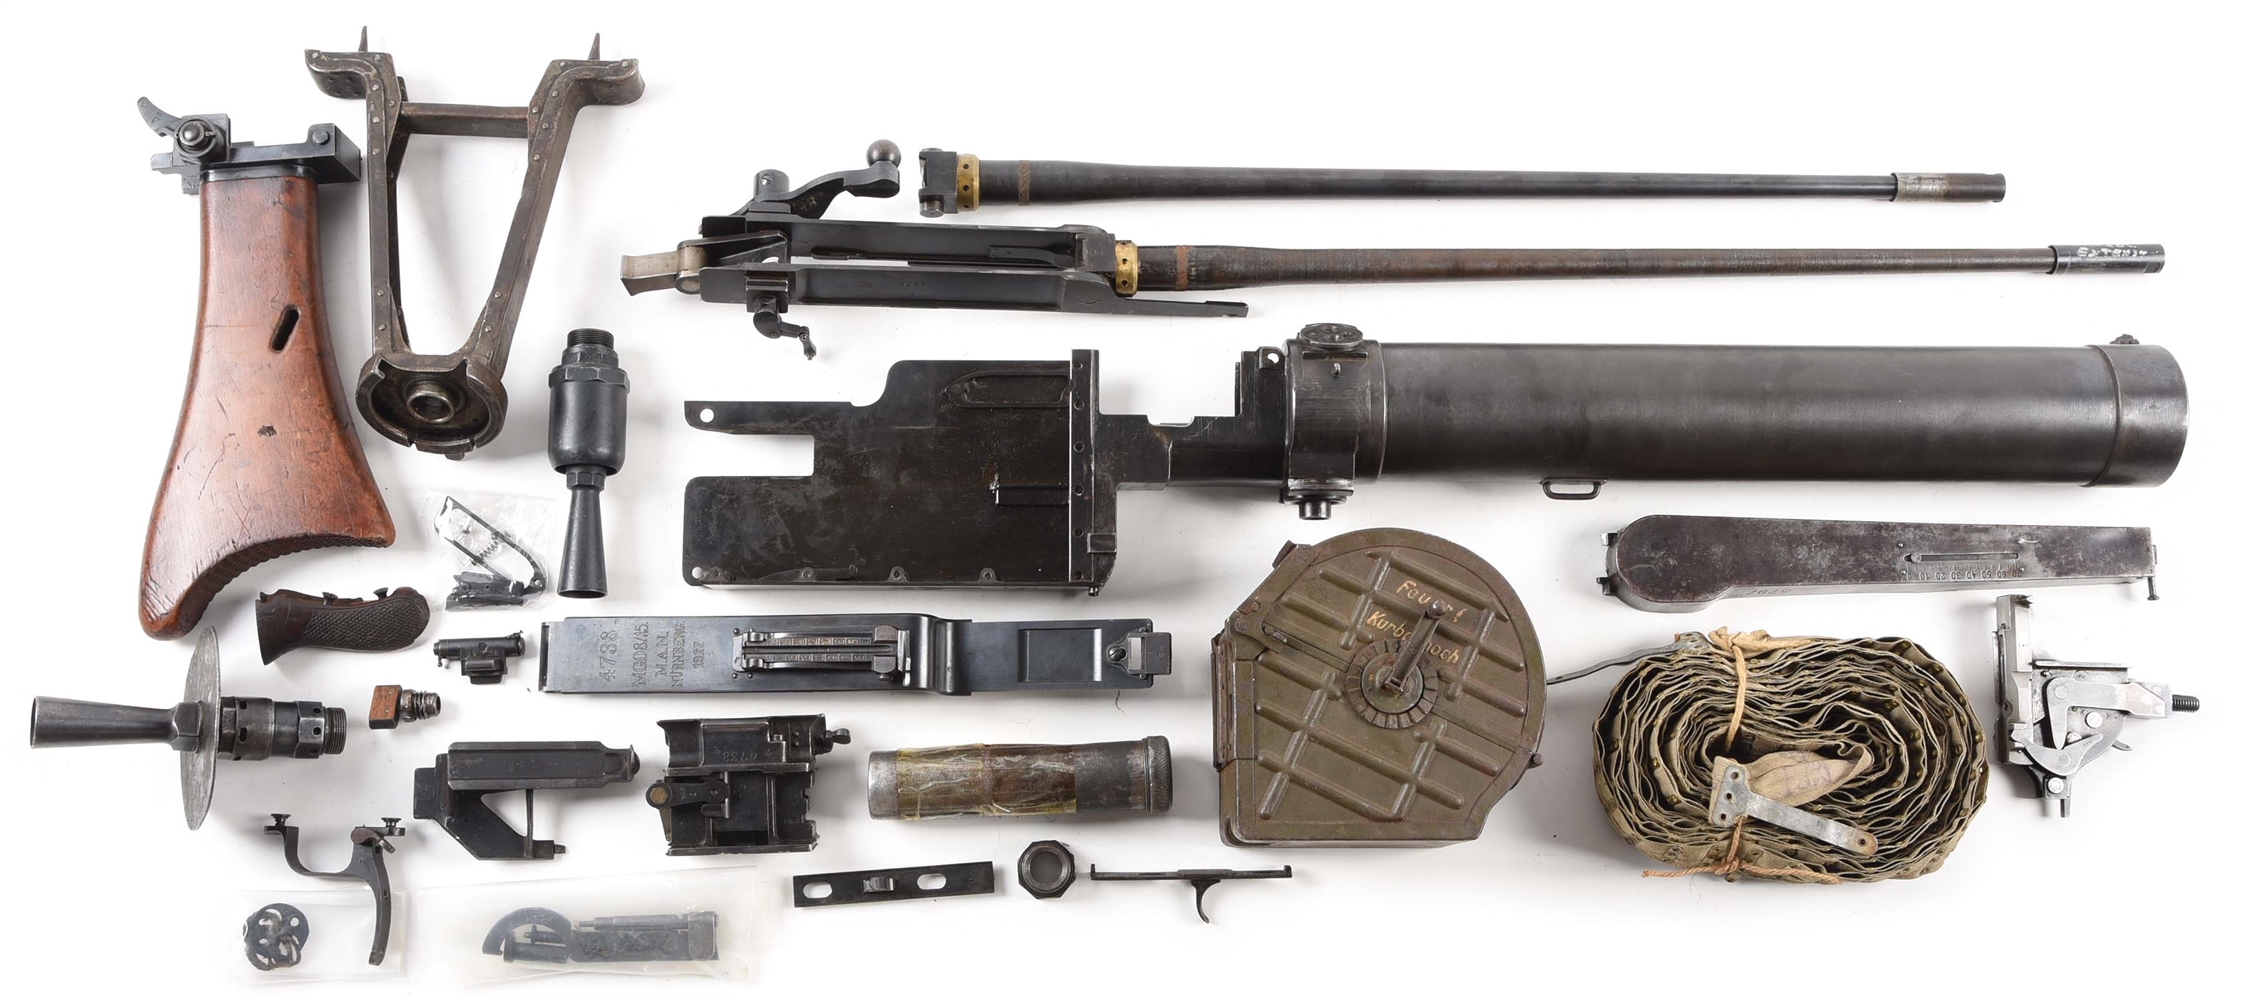 VERY NICE & NEARLY COMPLETE MAXIM MG 08/15 MACHINE GUN PARTS KIT WITH DESIRABLE ASSORTMENT OF ADDITIONAL SPARE PARTS.